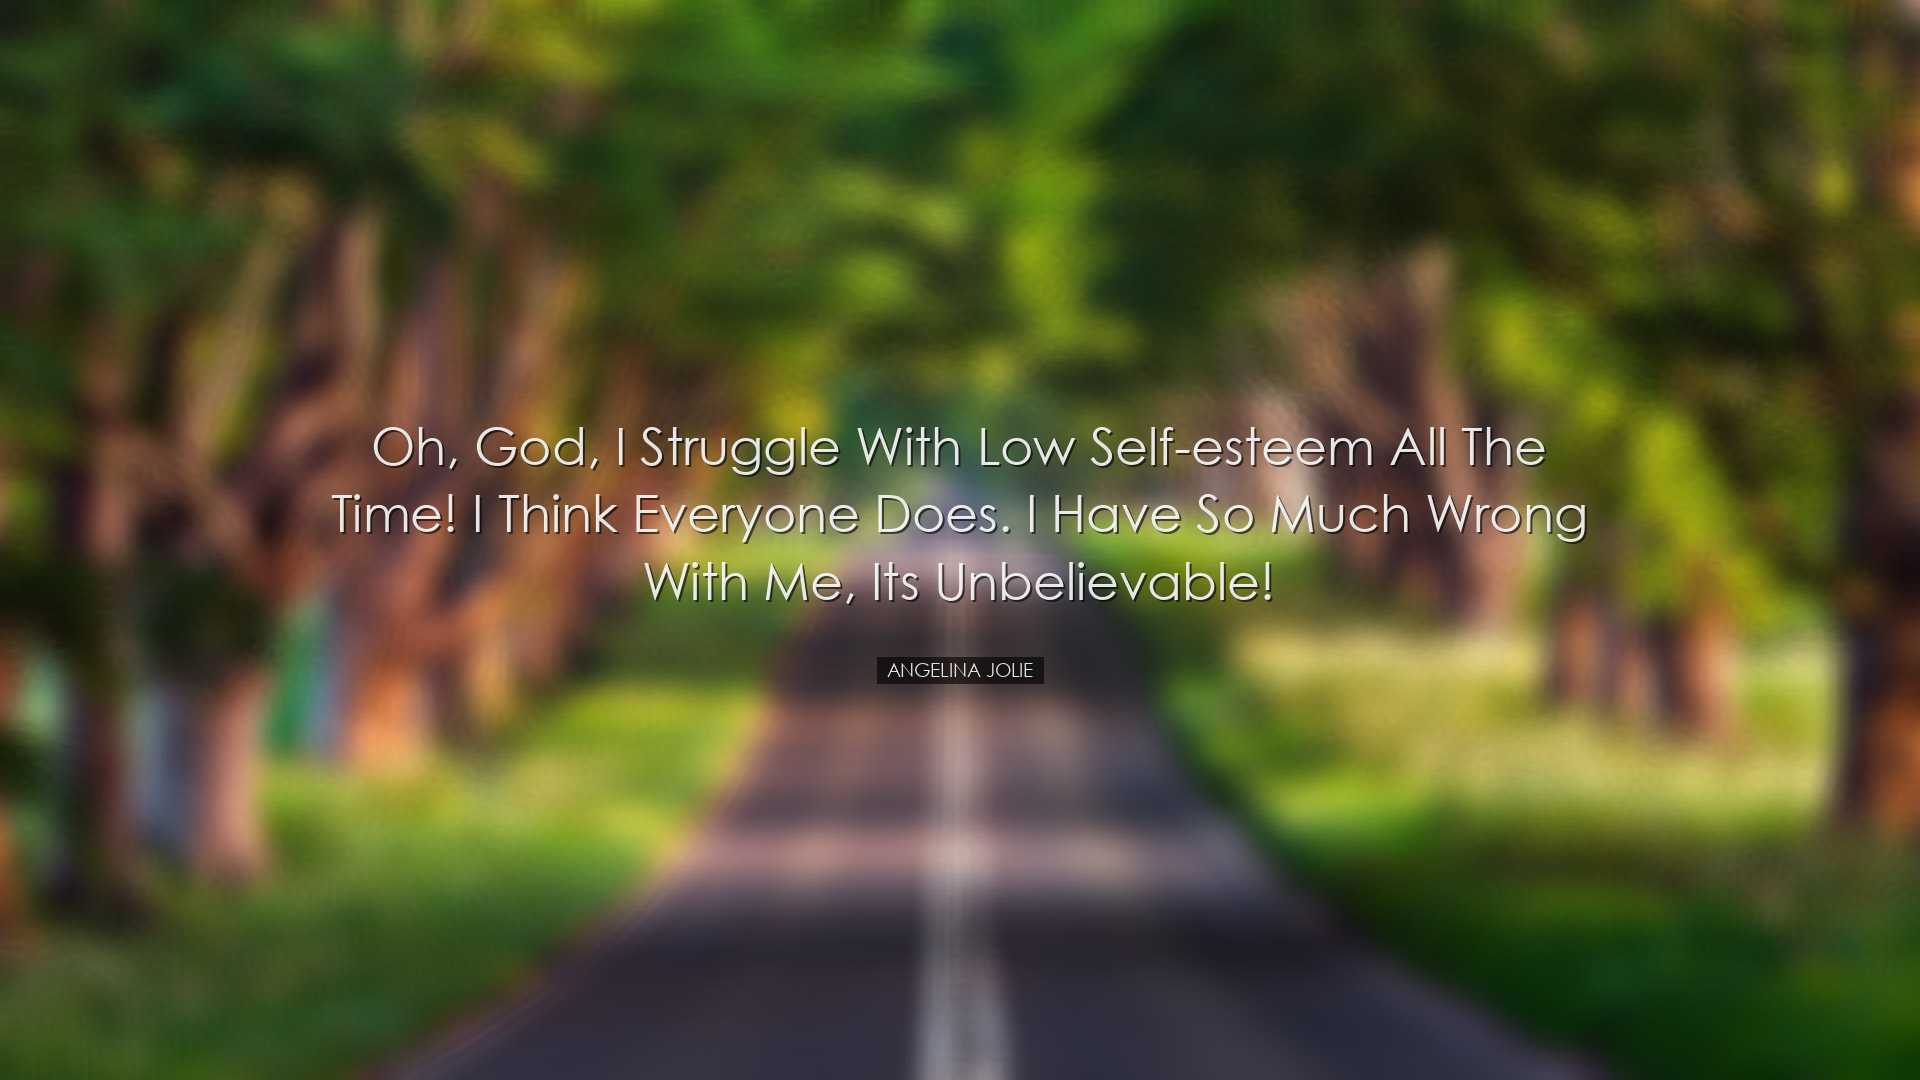 Oh, God, I struggle with low self-esteem all the time! I think eve